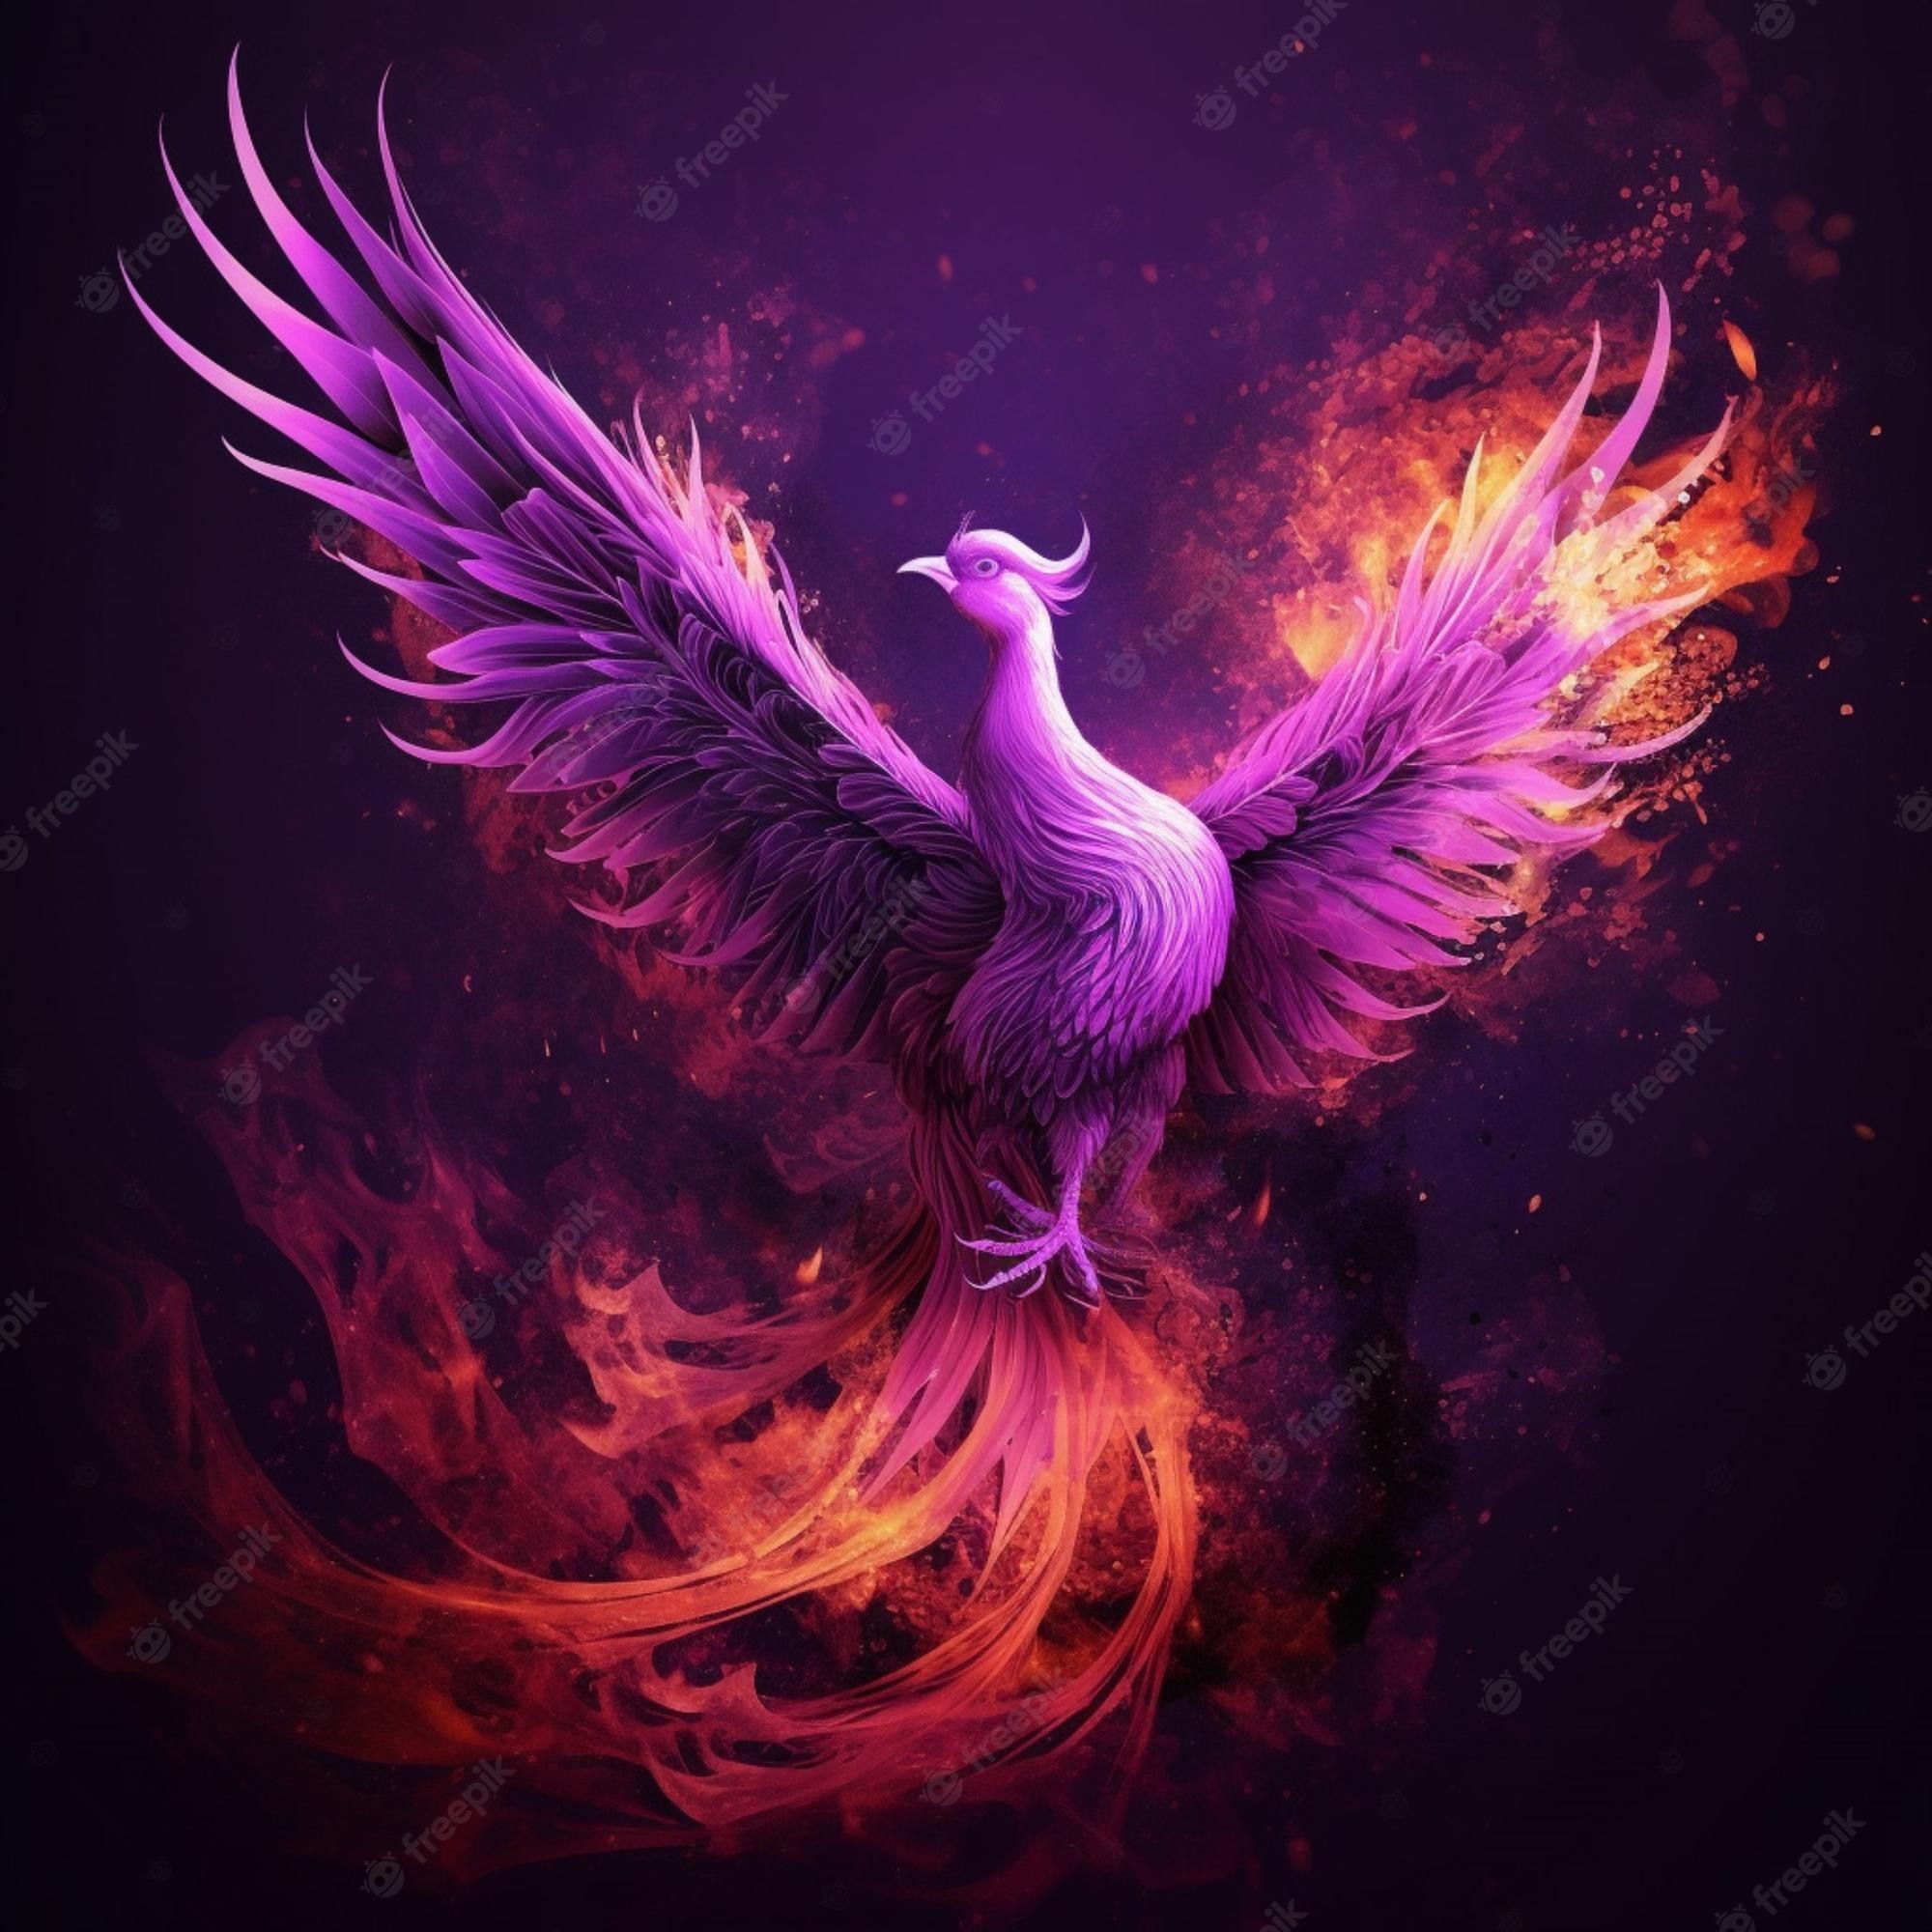 Premium Photo. A purple bird with wings spread is shown with the word phoenix